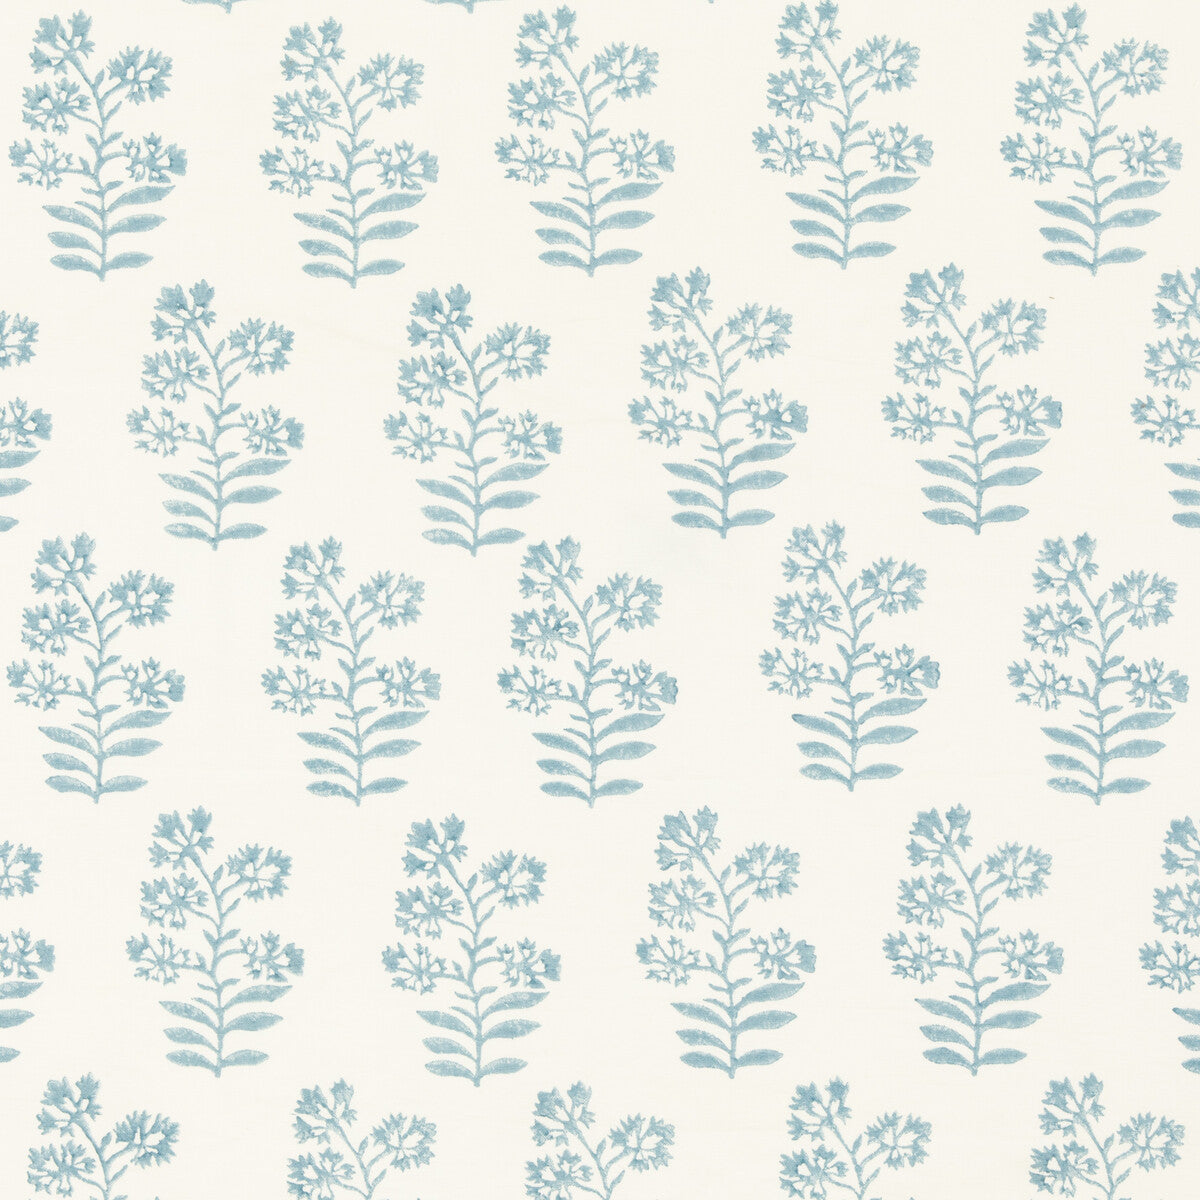 Wild Flower fabric in soft blue color - pattern PP50483.7.0 - by Baker Lifestyle in the Block Party collection